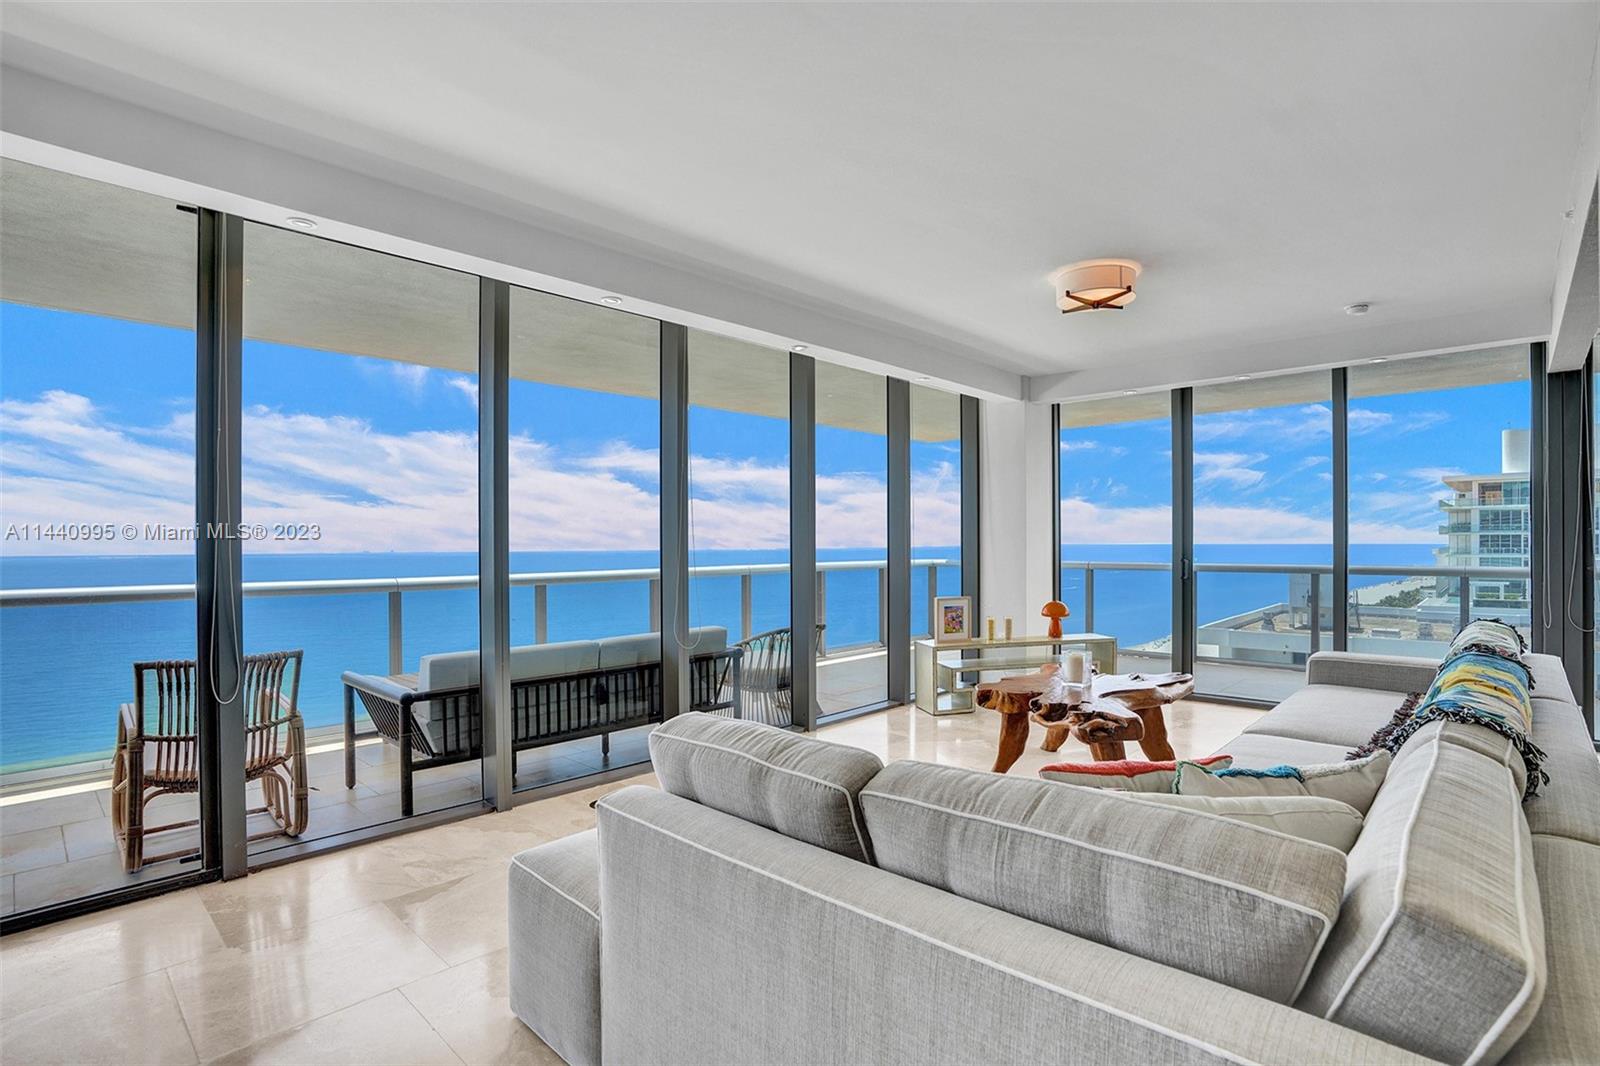 Luxury unit at Mei on Millionaires' Row, fully furnished and appointed. Expansive ocean and city views from this corner unit with wrap around terrace. Marble floors throughout and stone countertops. Amenities include fitness center, beach service, 24 hour valet and security, and more!